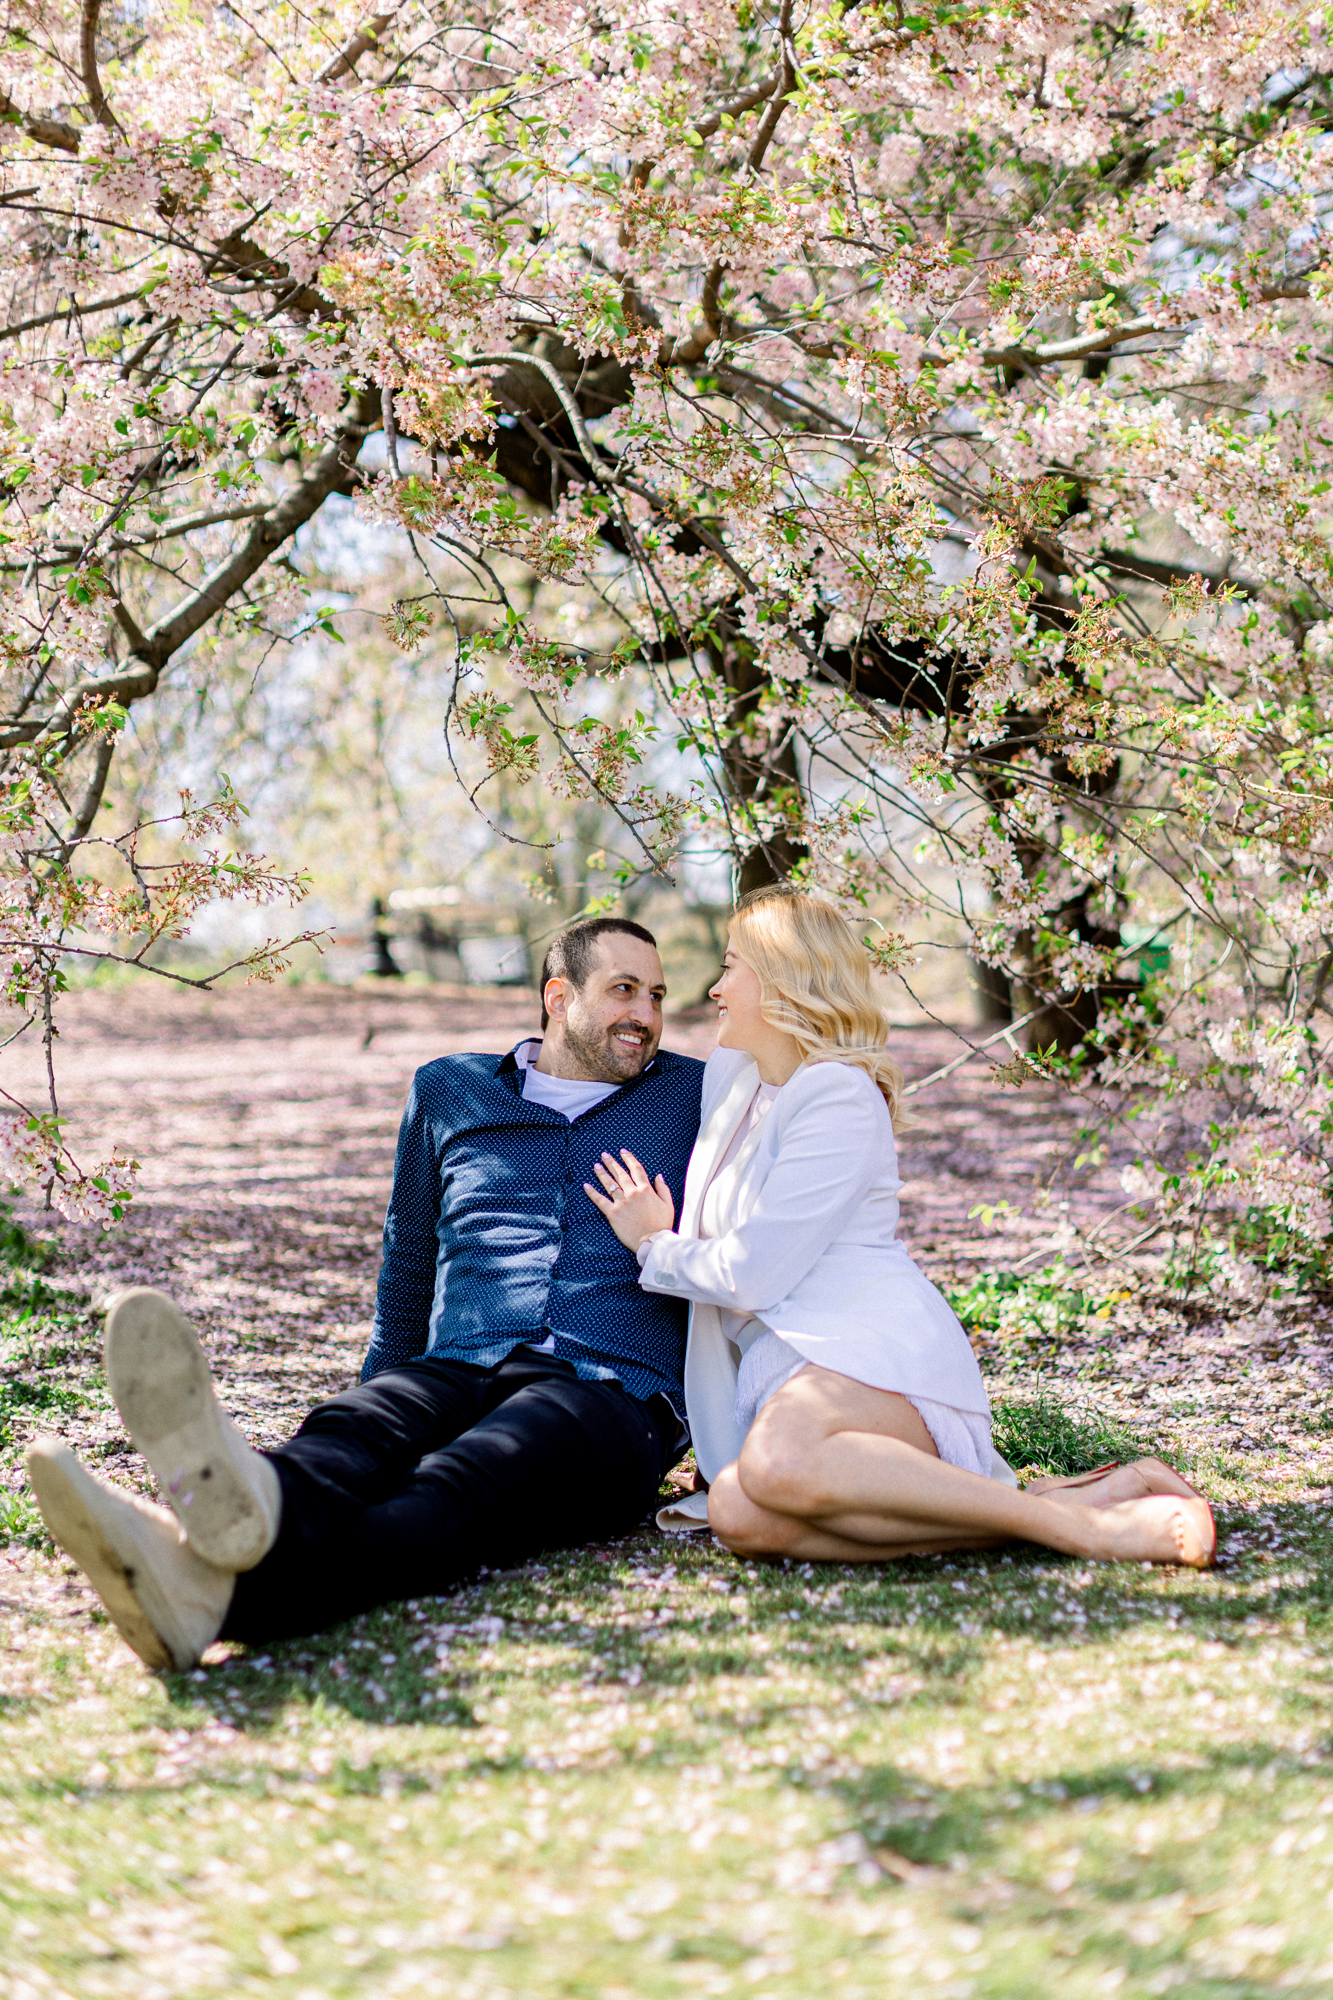 Bright New York Engagement Photography with Spring Blossoms